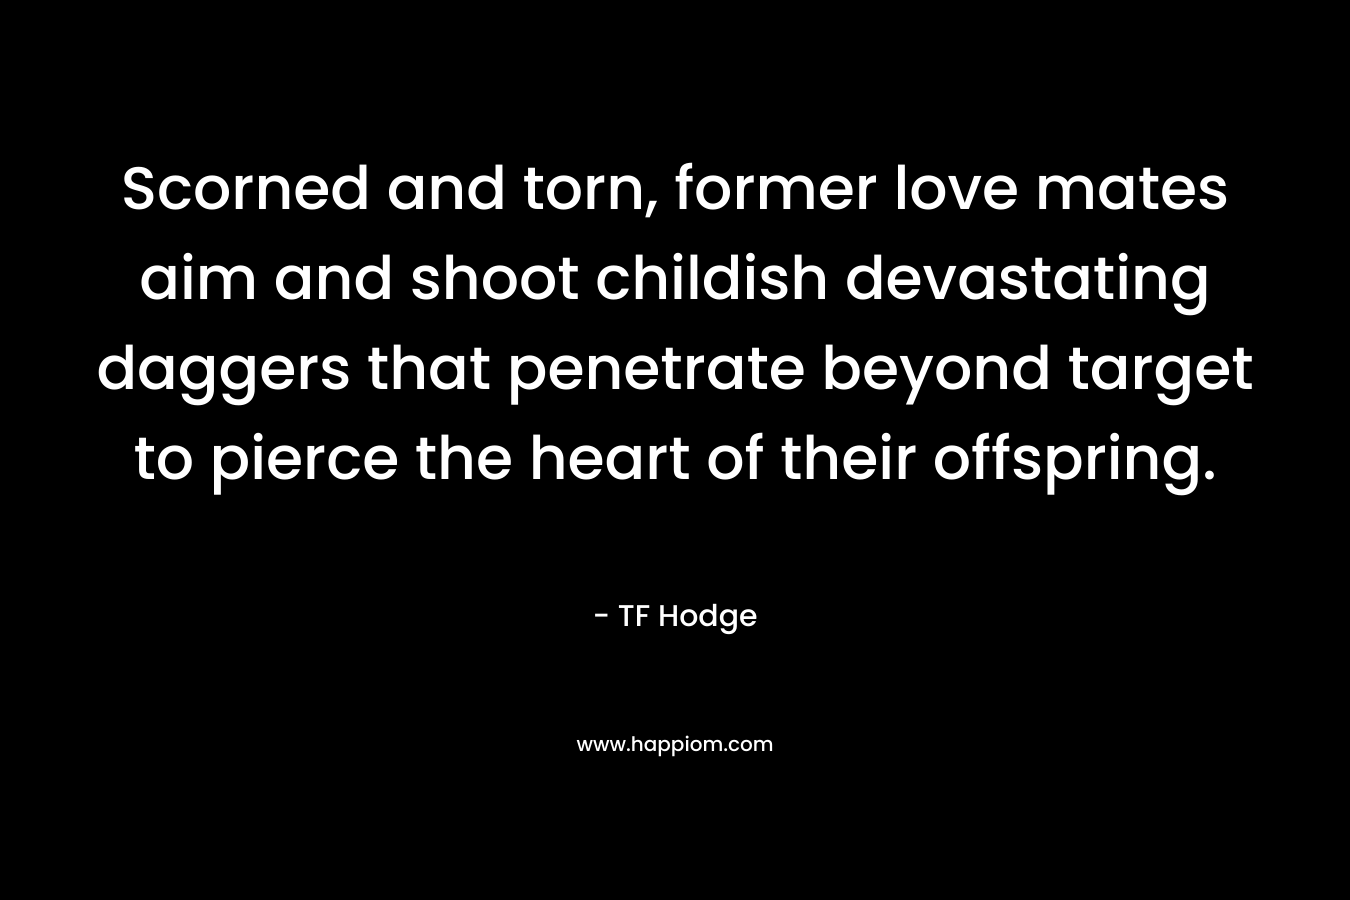 Scorned and torn, former love mates aim and shoot childish devastating daggers that penetrate beyond target to pierce the heart of their offspring. – TF Hodge